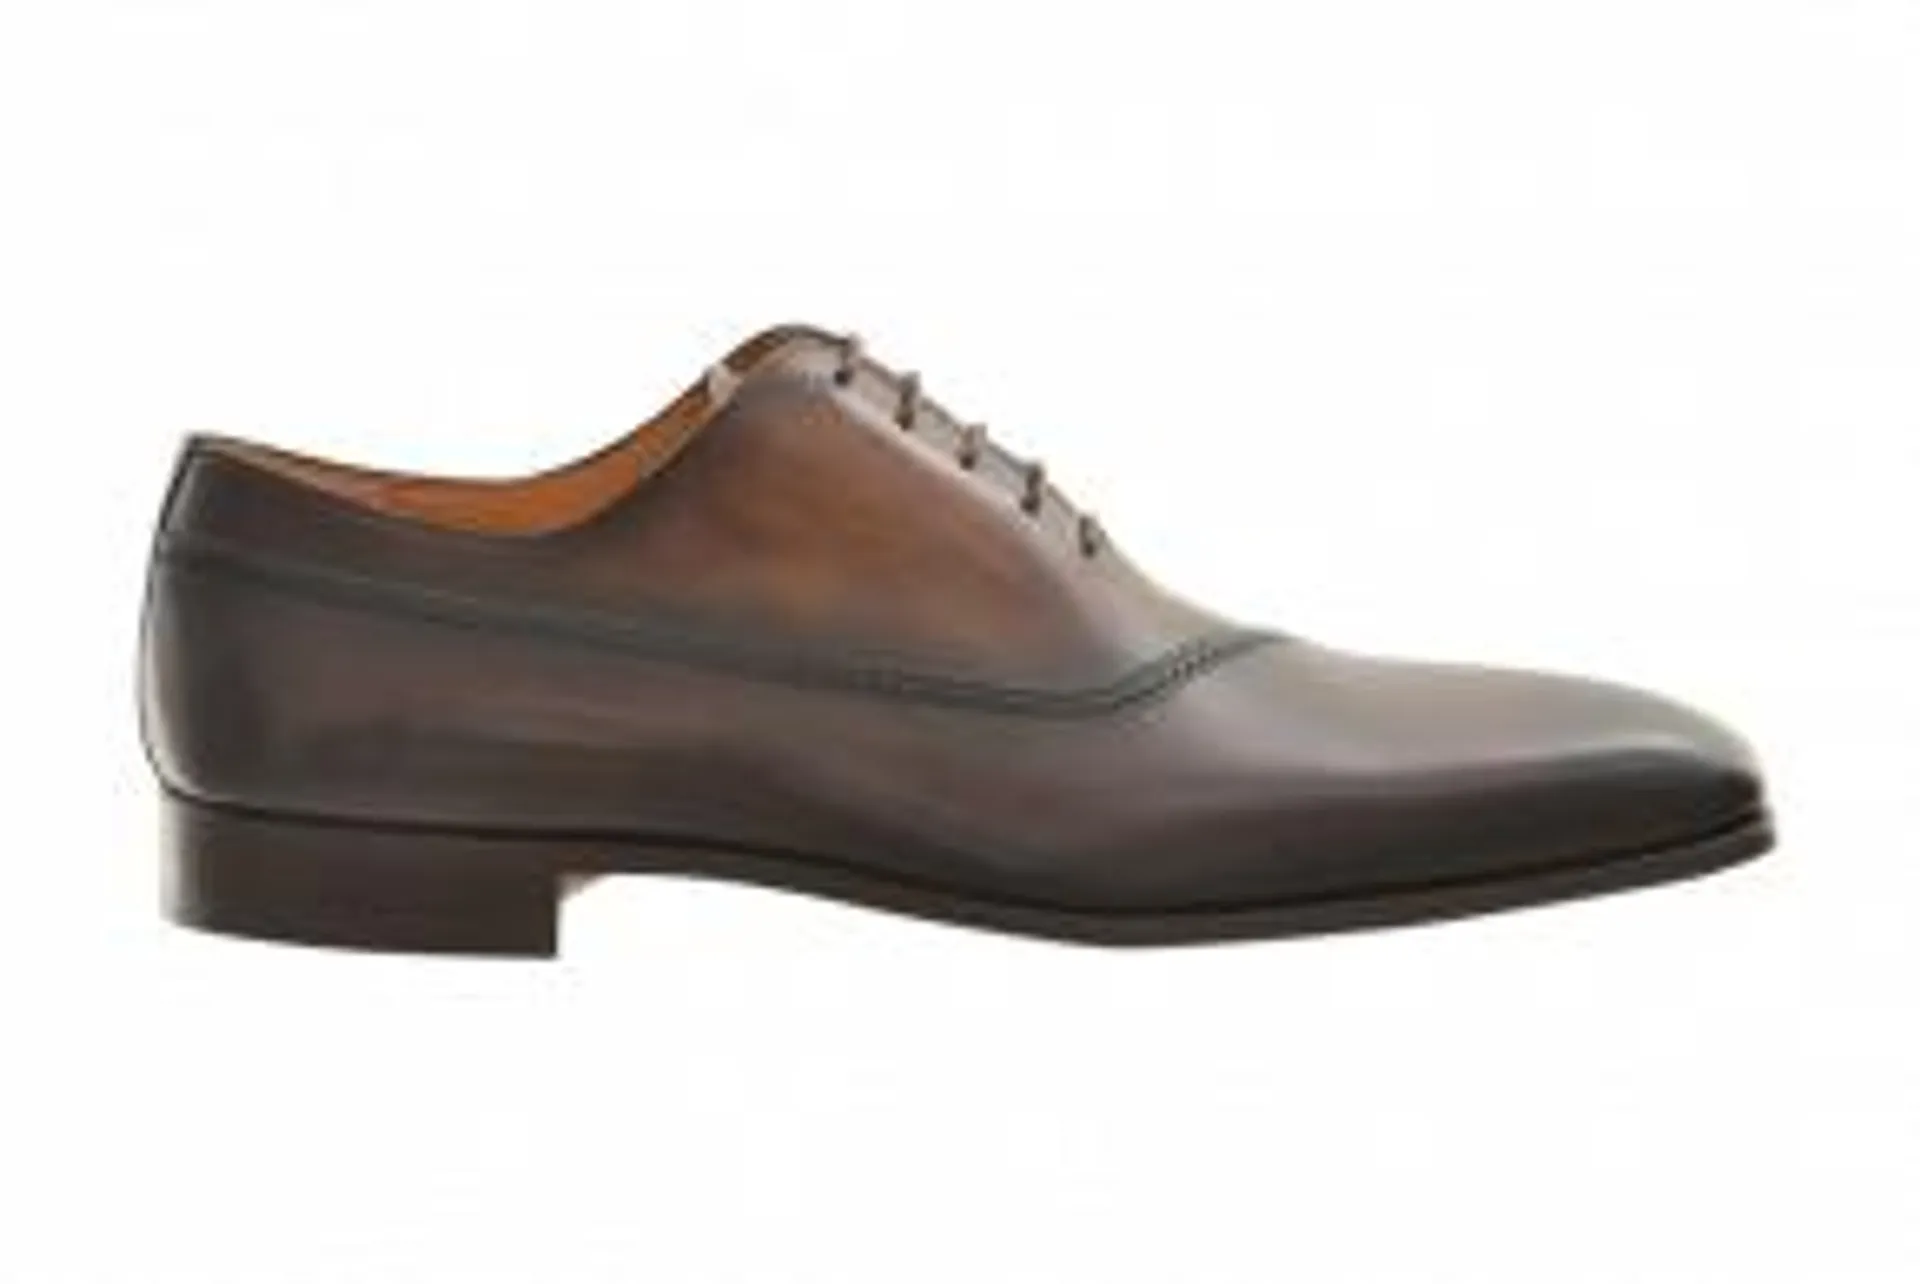 Magnanni Fancy Punched Oxford Lace-Up